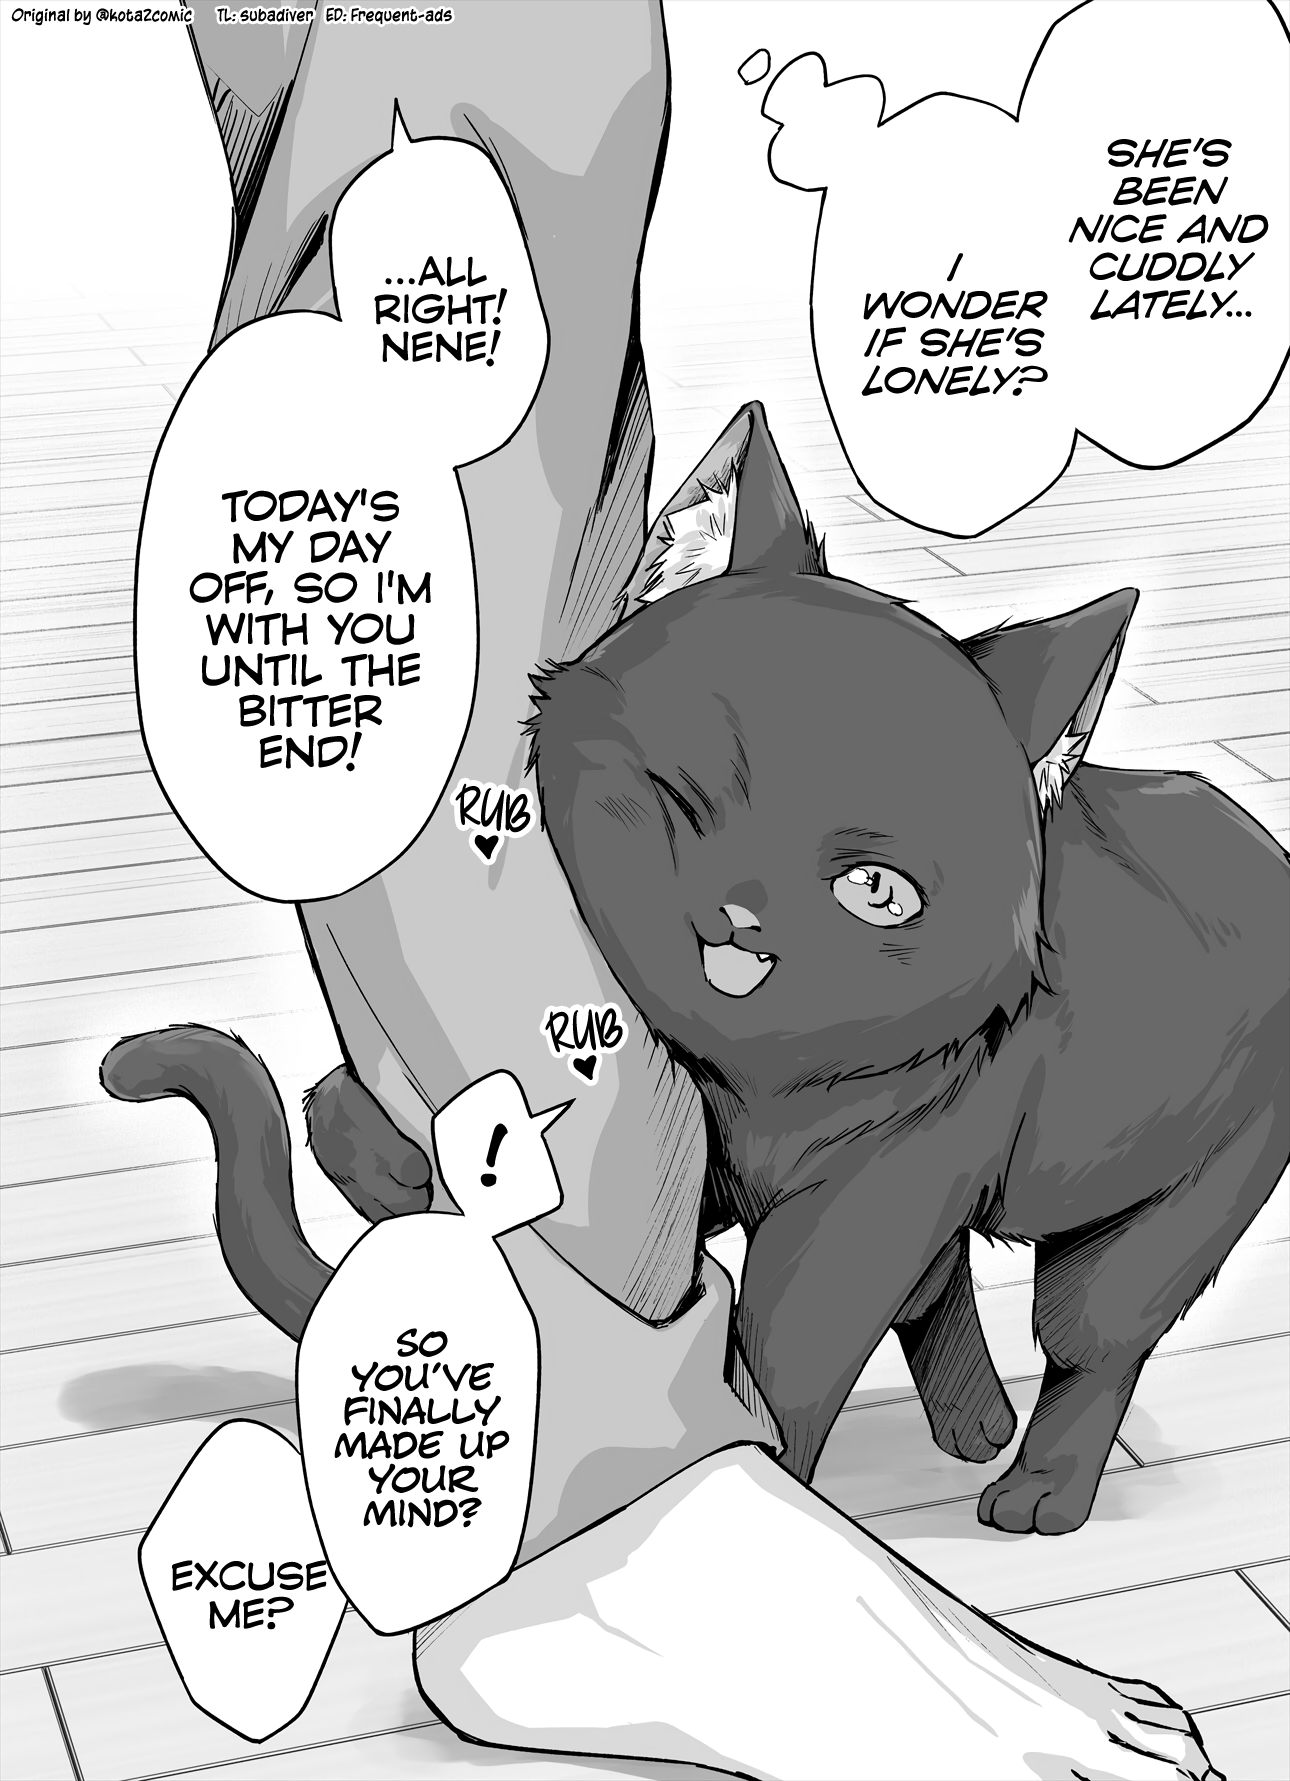 The Yandere Pet Cat Is Overly Domineering - Page 1